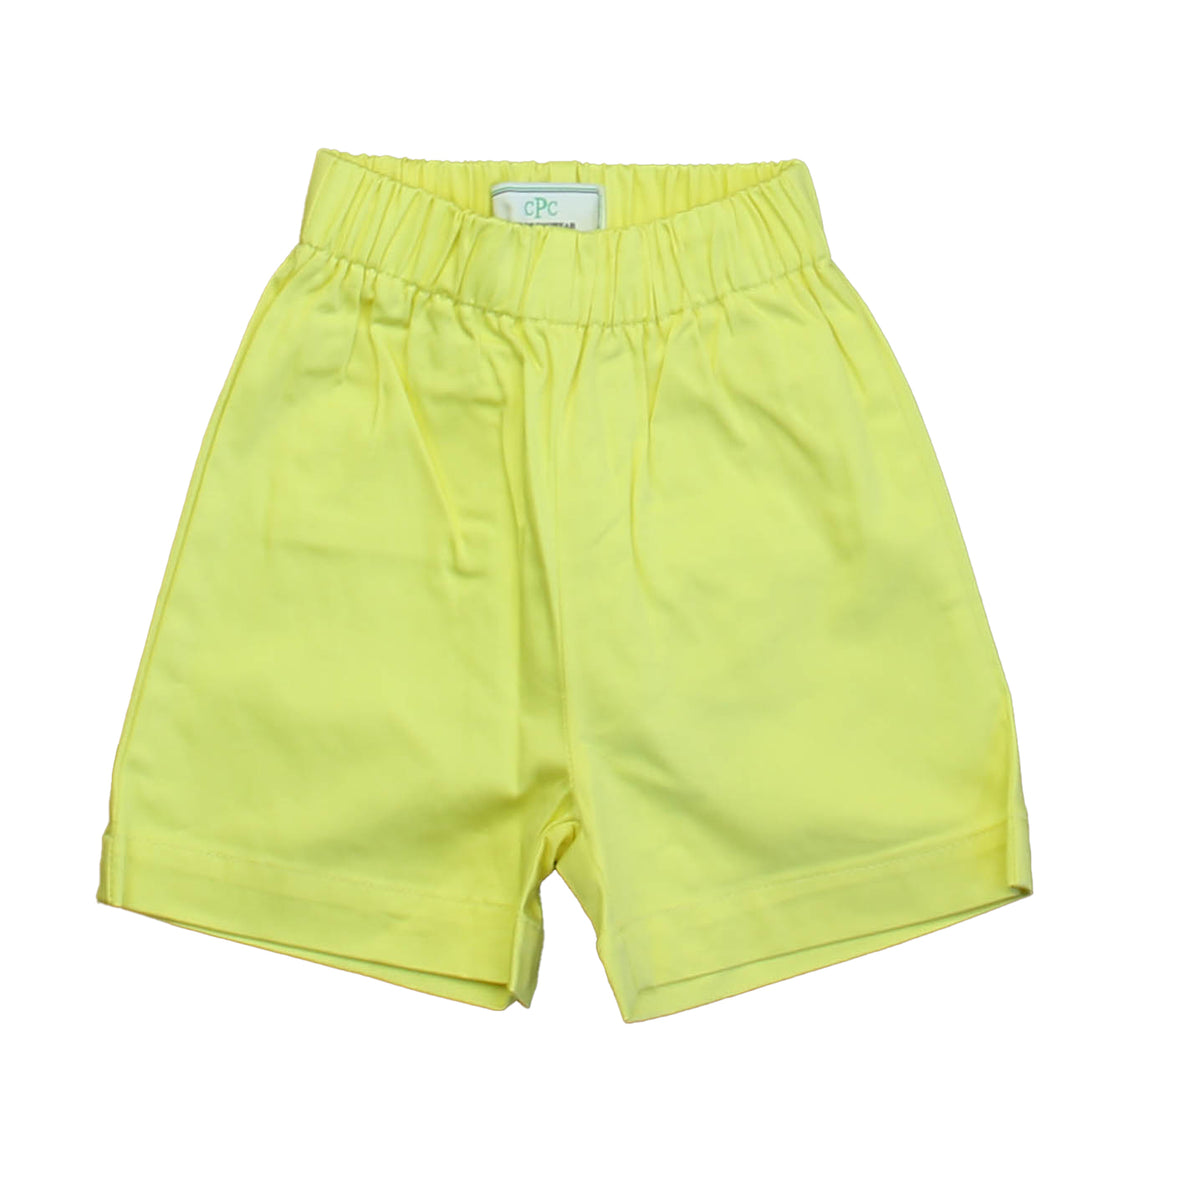 New with Tags: Limelight Yellow Shorts -- FINAL SALE